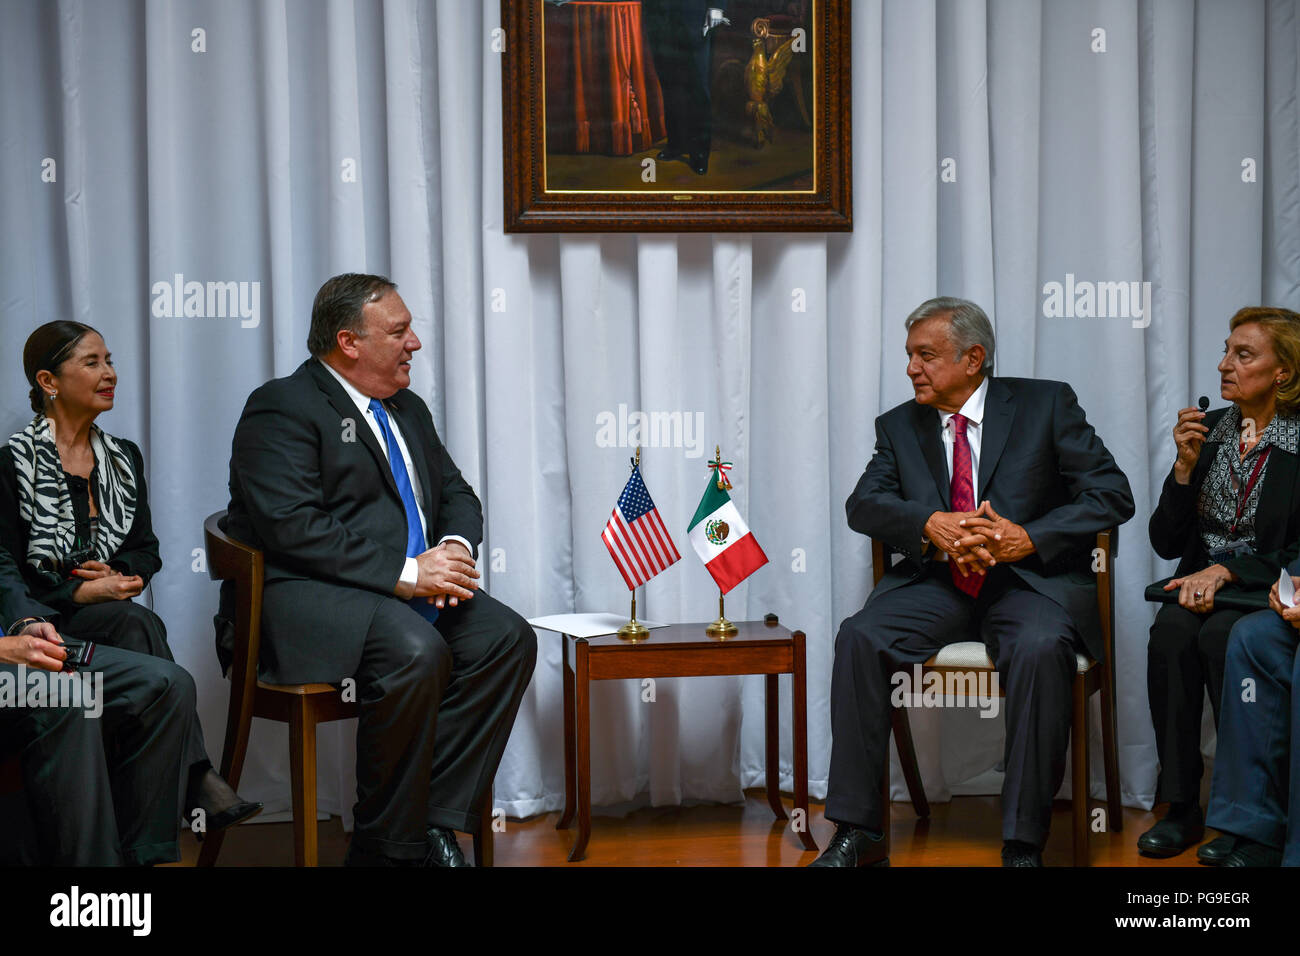 U.S. Secretary of State Michael R. Pompeo meets with Mexican President-elect Andres Manuel Lopez Obrador in Mexico City, Mexico on July 13, 2018. Stock Photo